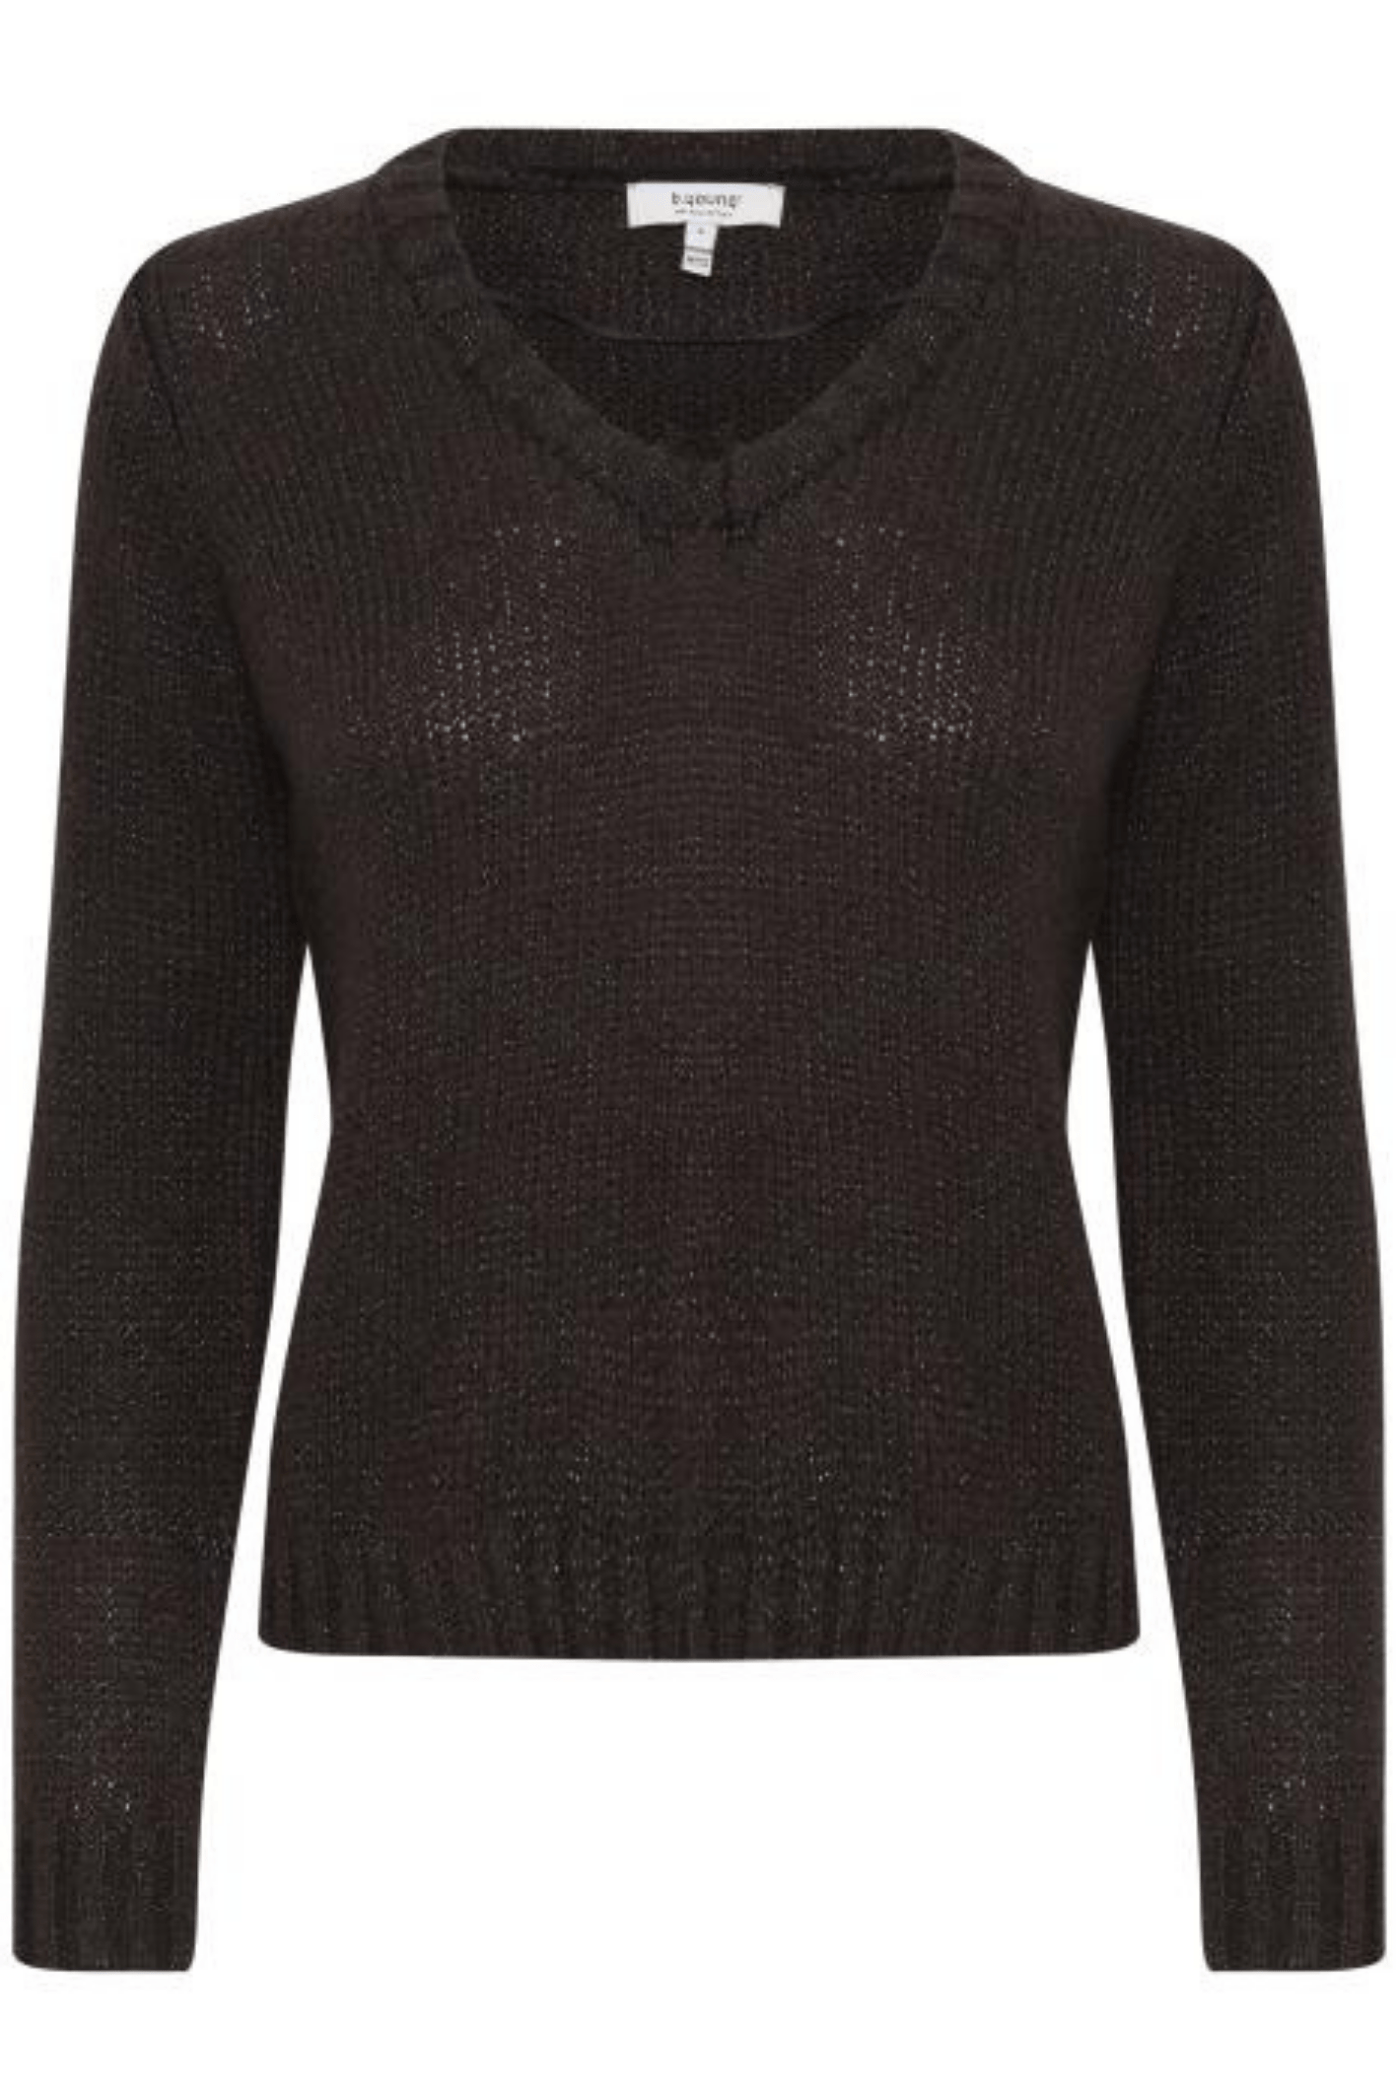 B Young Chocolate Brown V-Neck Knit Jumper - Jezabel Boutique